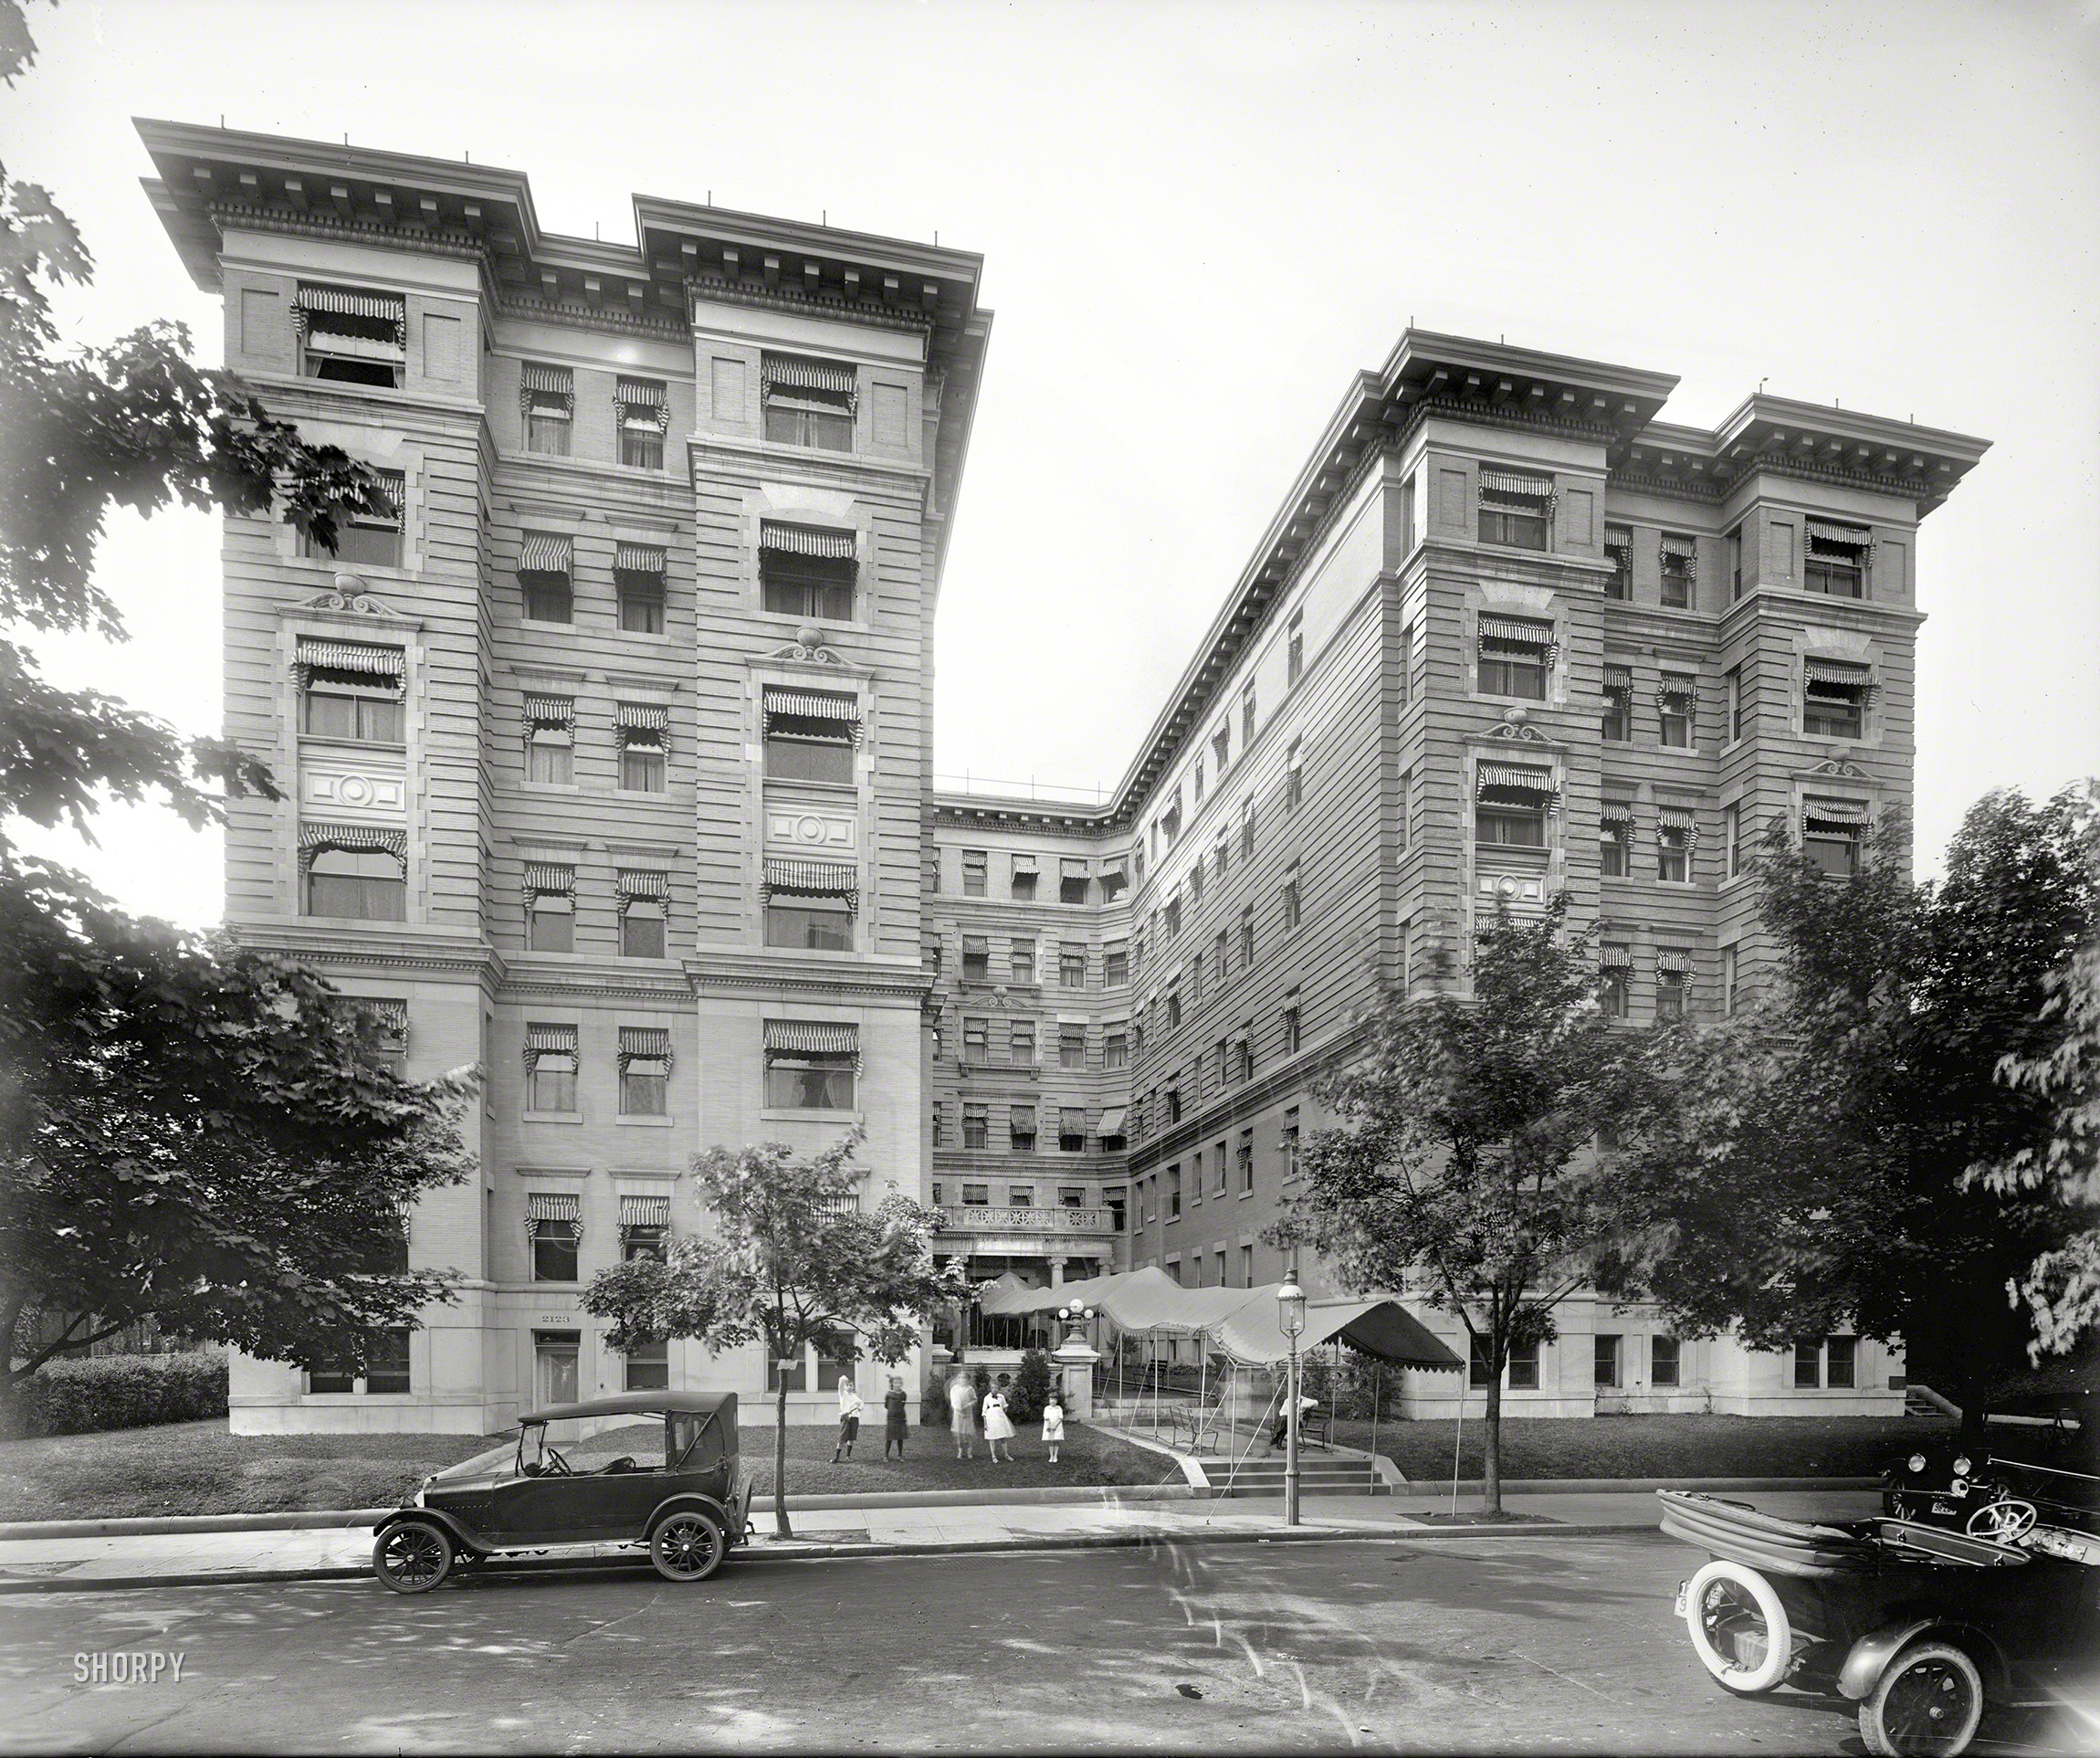 Washington, D.C., 1919. "The Brighton, 2123 California Street." Come play with us! 8x10 inch glass negative, National Photo Company. View full size.